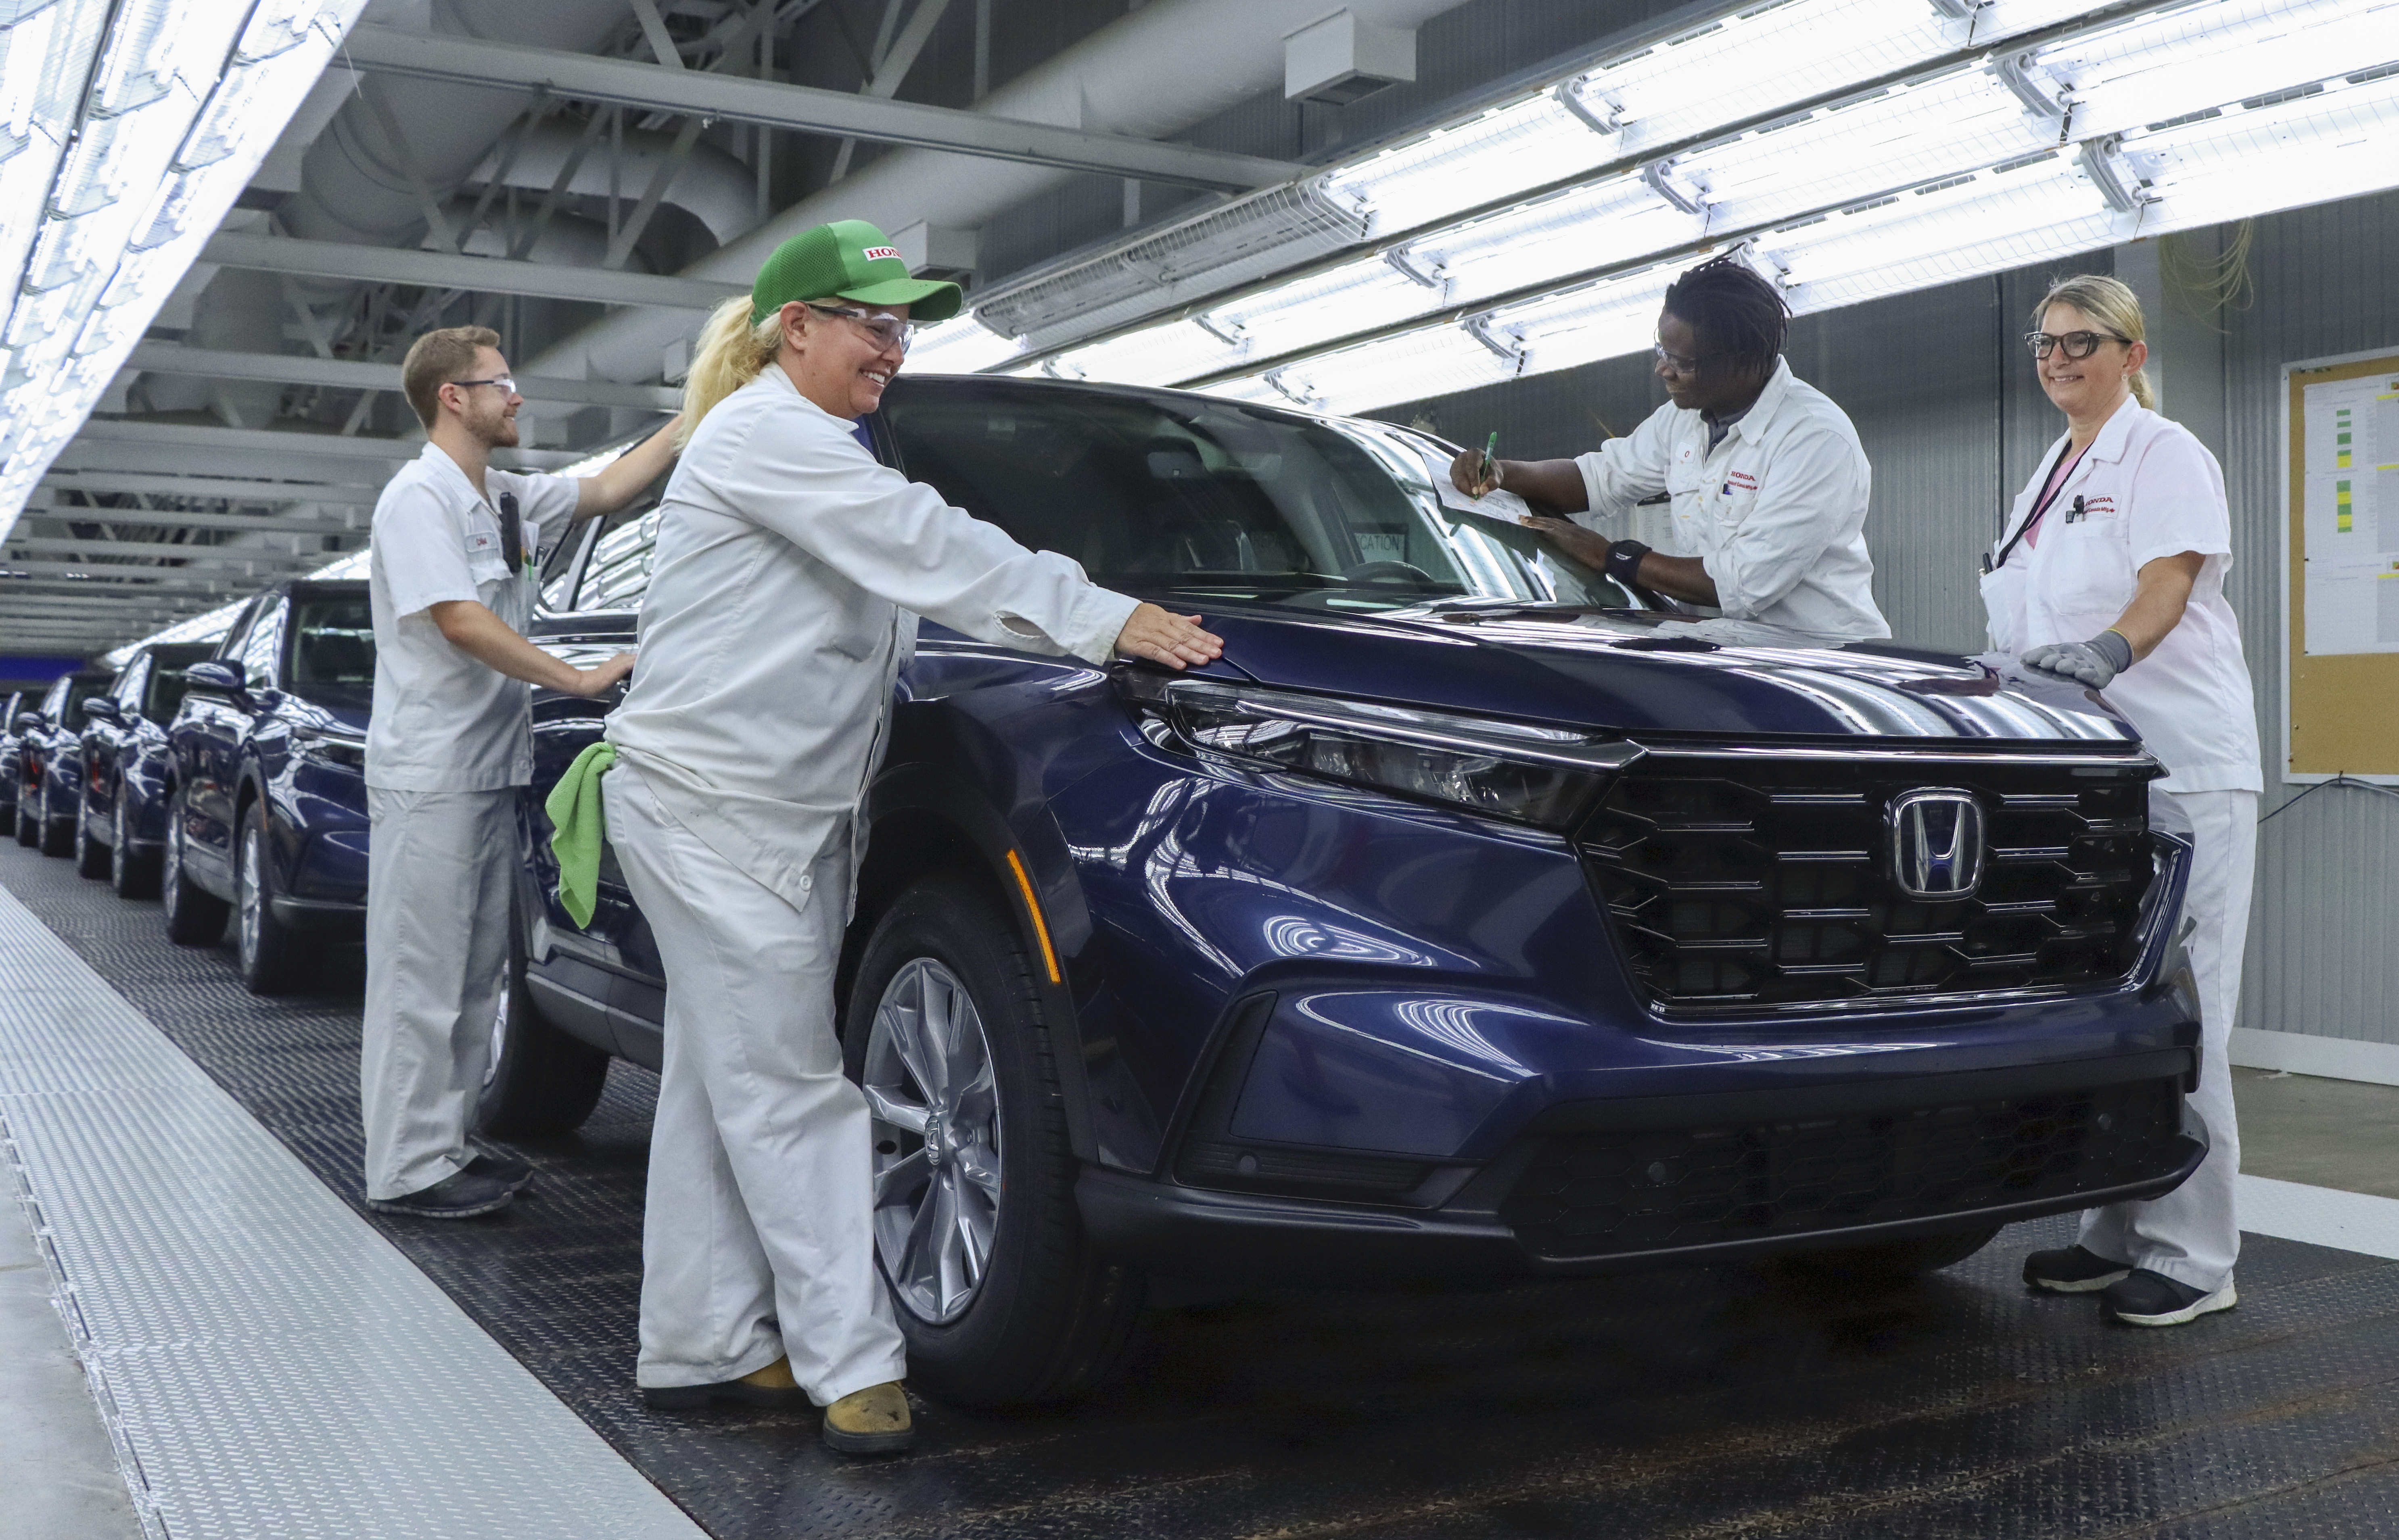 23 Honda Cr V Production Of 6th Gen Suv Kicks Off In Canada Us Plants To Follow In The Coming Days Paultan Org